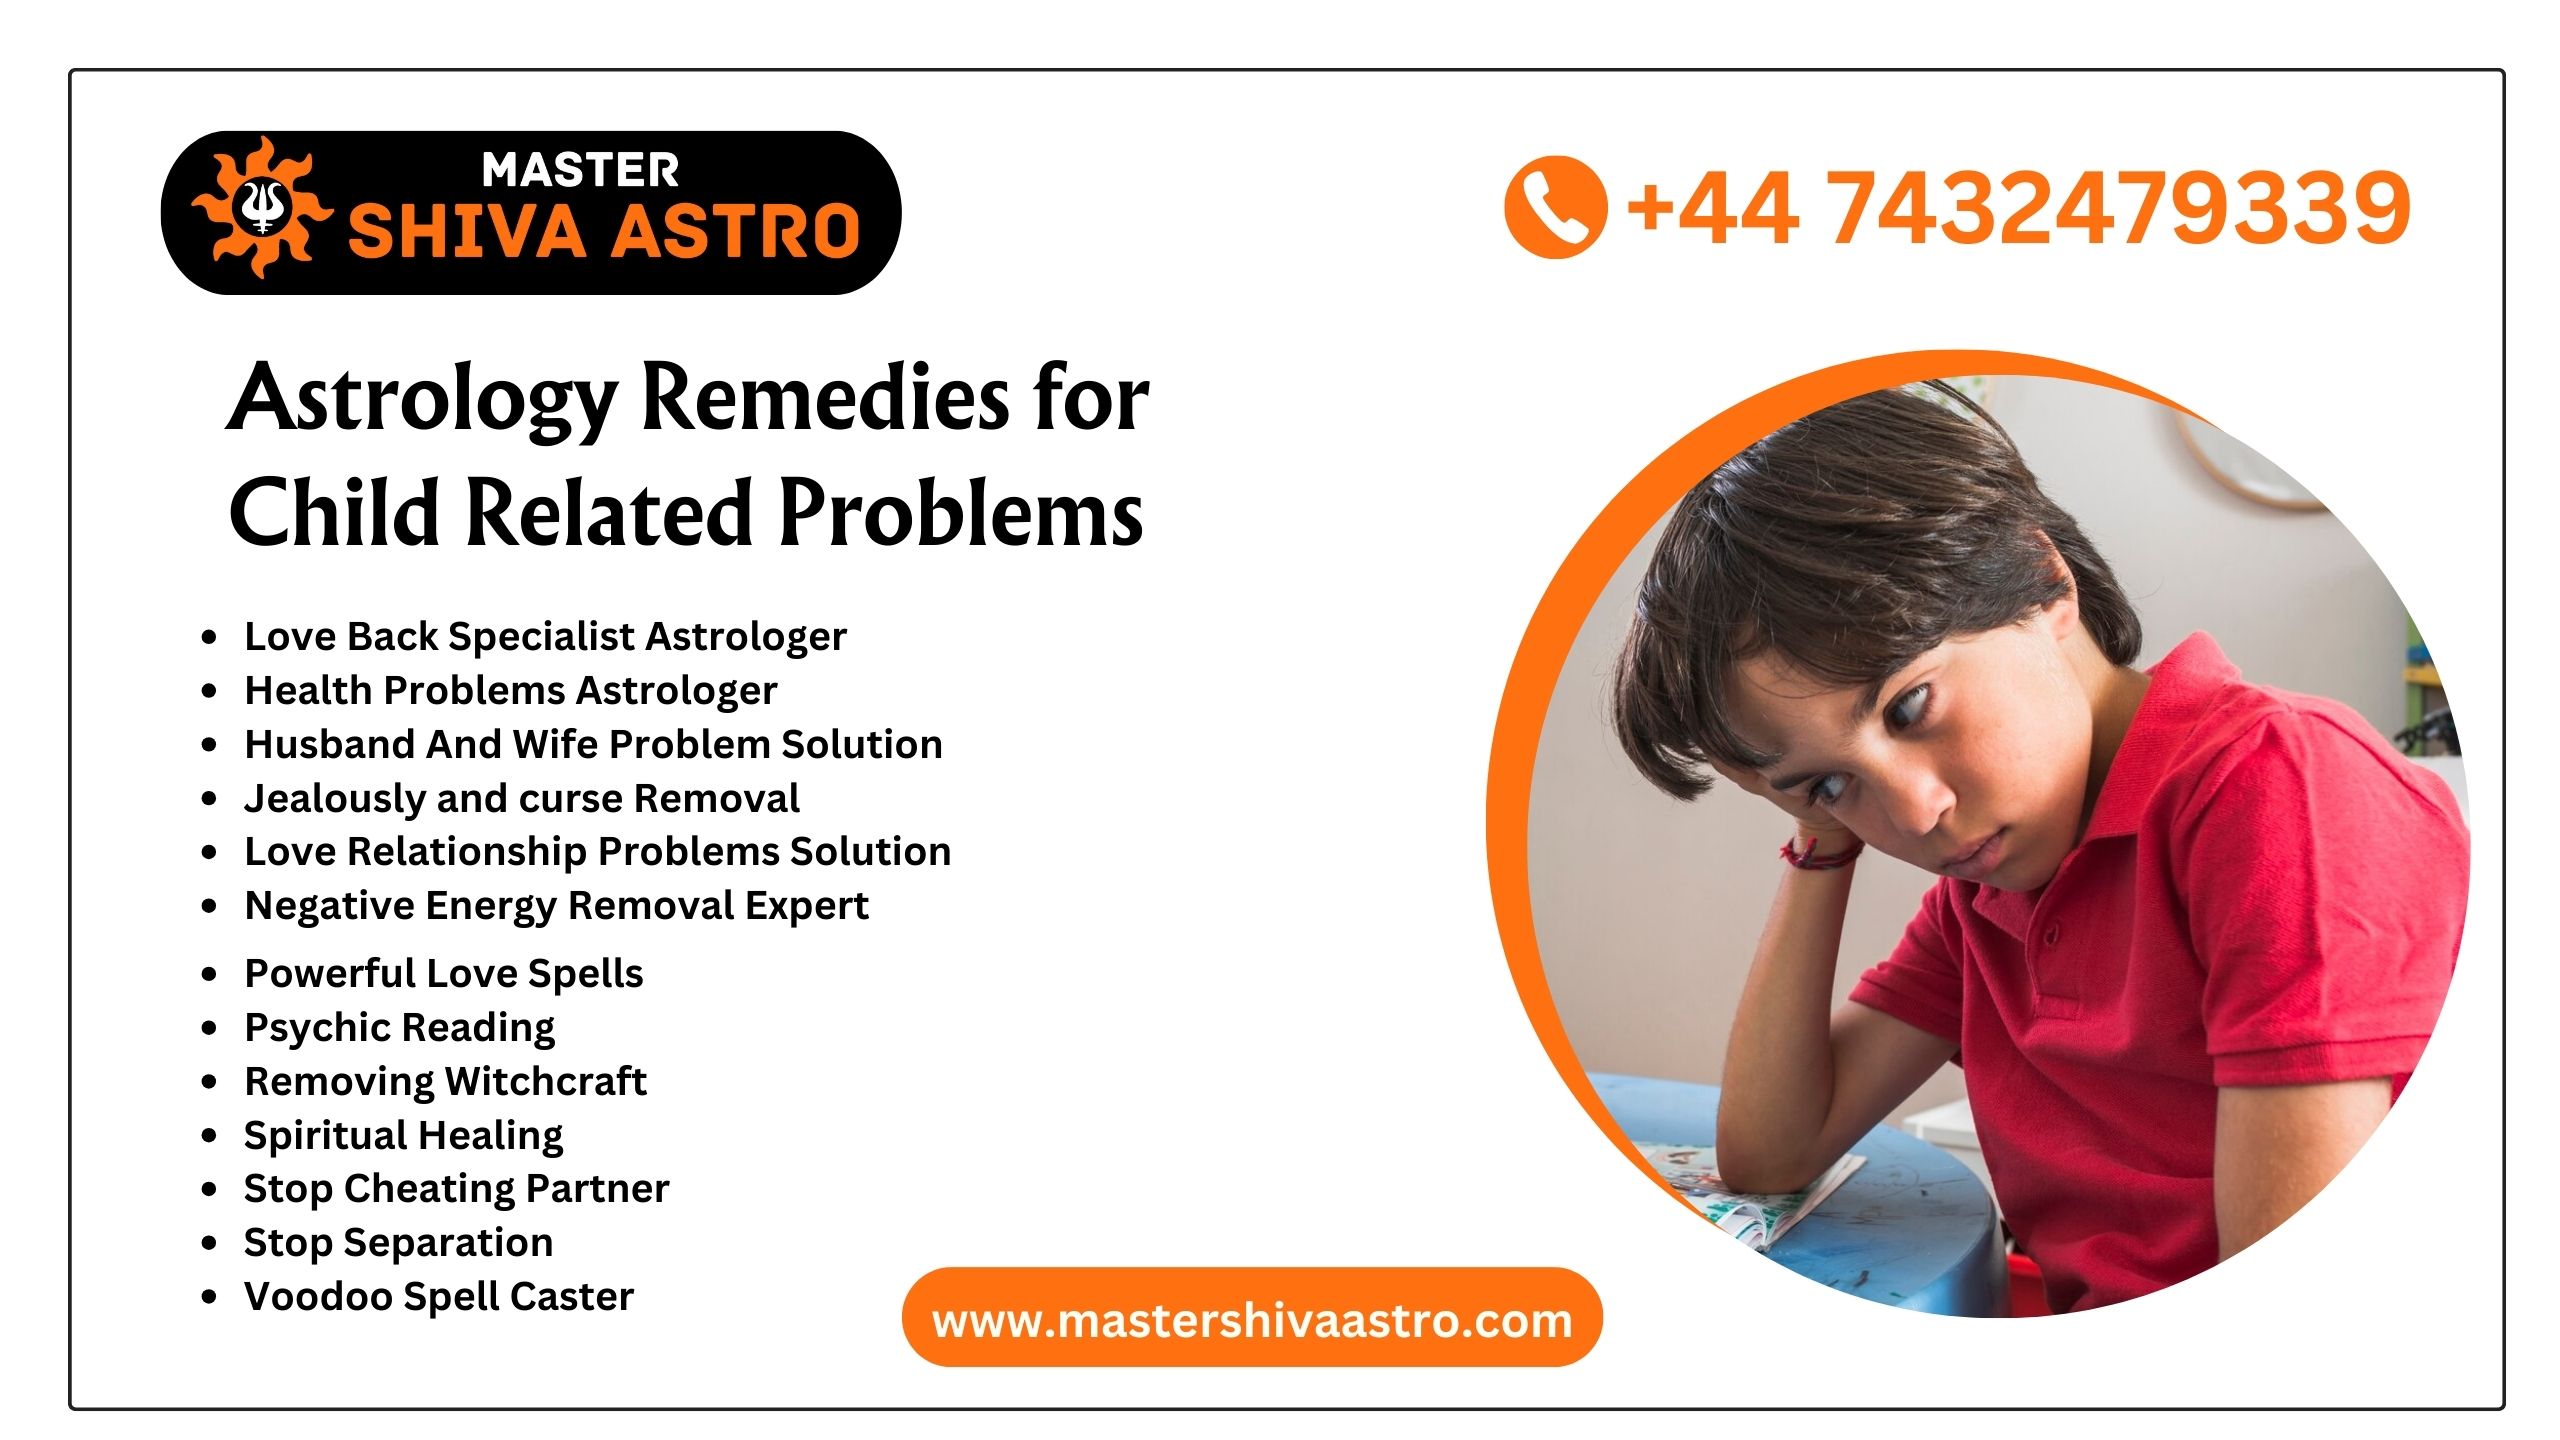 Astrology Remedies for Child Related Problems